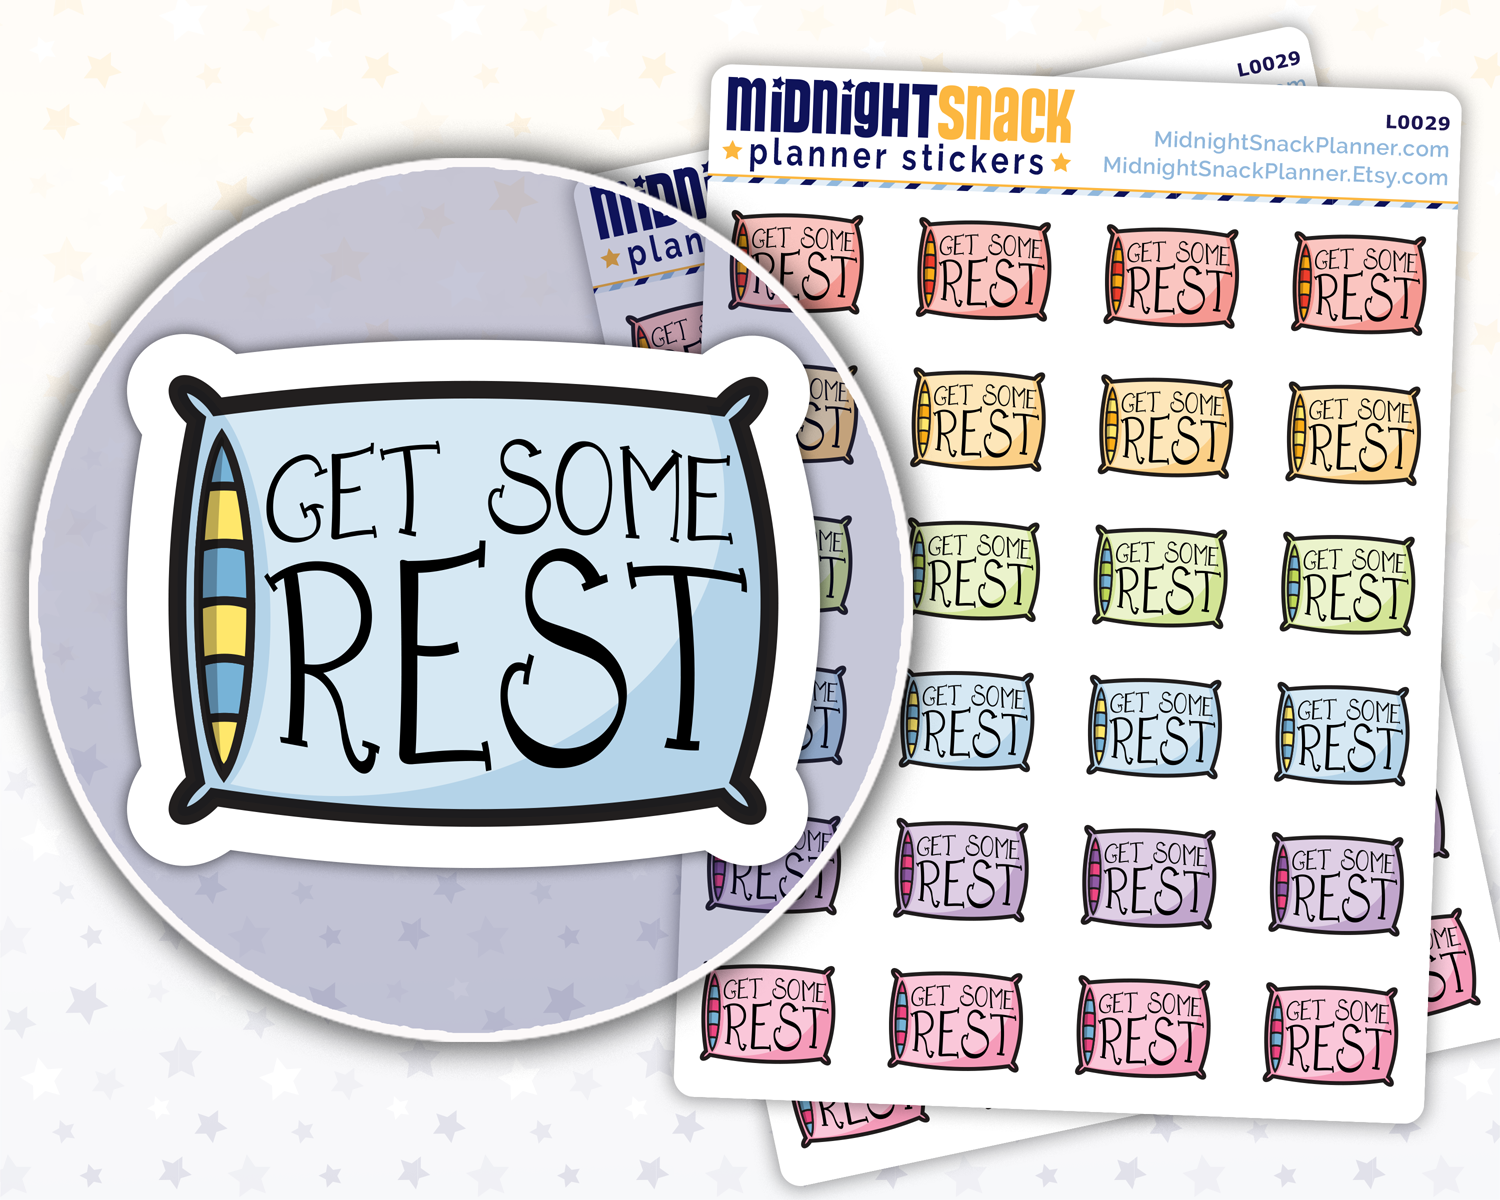 Get Some Rest handdrawn planner stickers featuring a pillow in multiple colors.